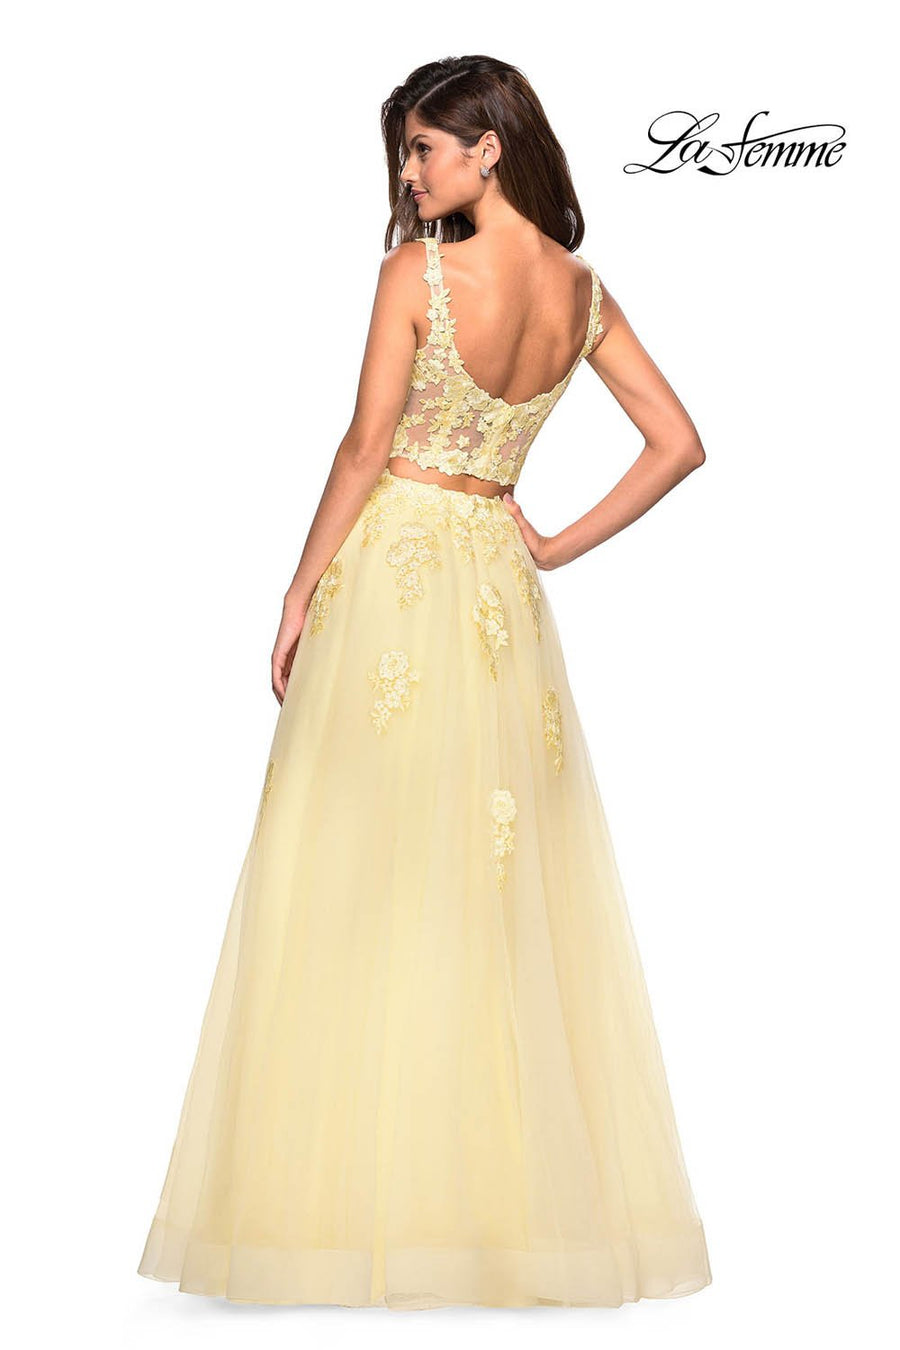 La Femme 27489 prom dress images.  La Femme 27489 is available in these colors: Blush, Dusty Blue, Pale Yellow, Periwinkle.